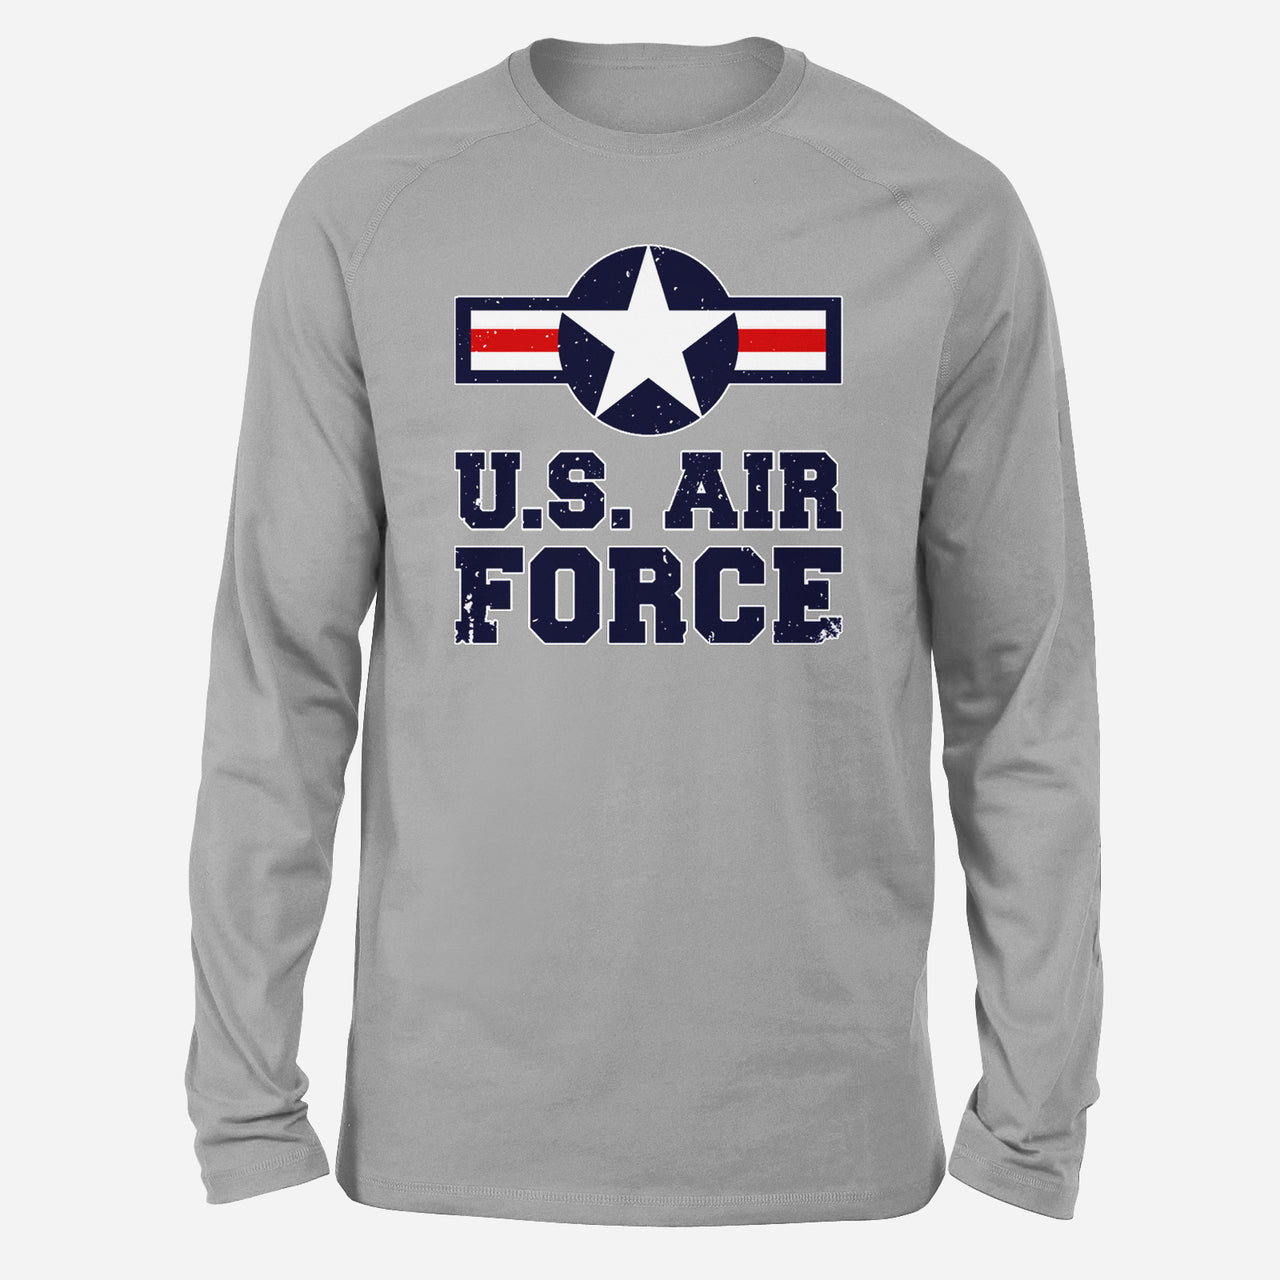 US Air Force Designed Long-Sleeve T-Shirts